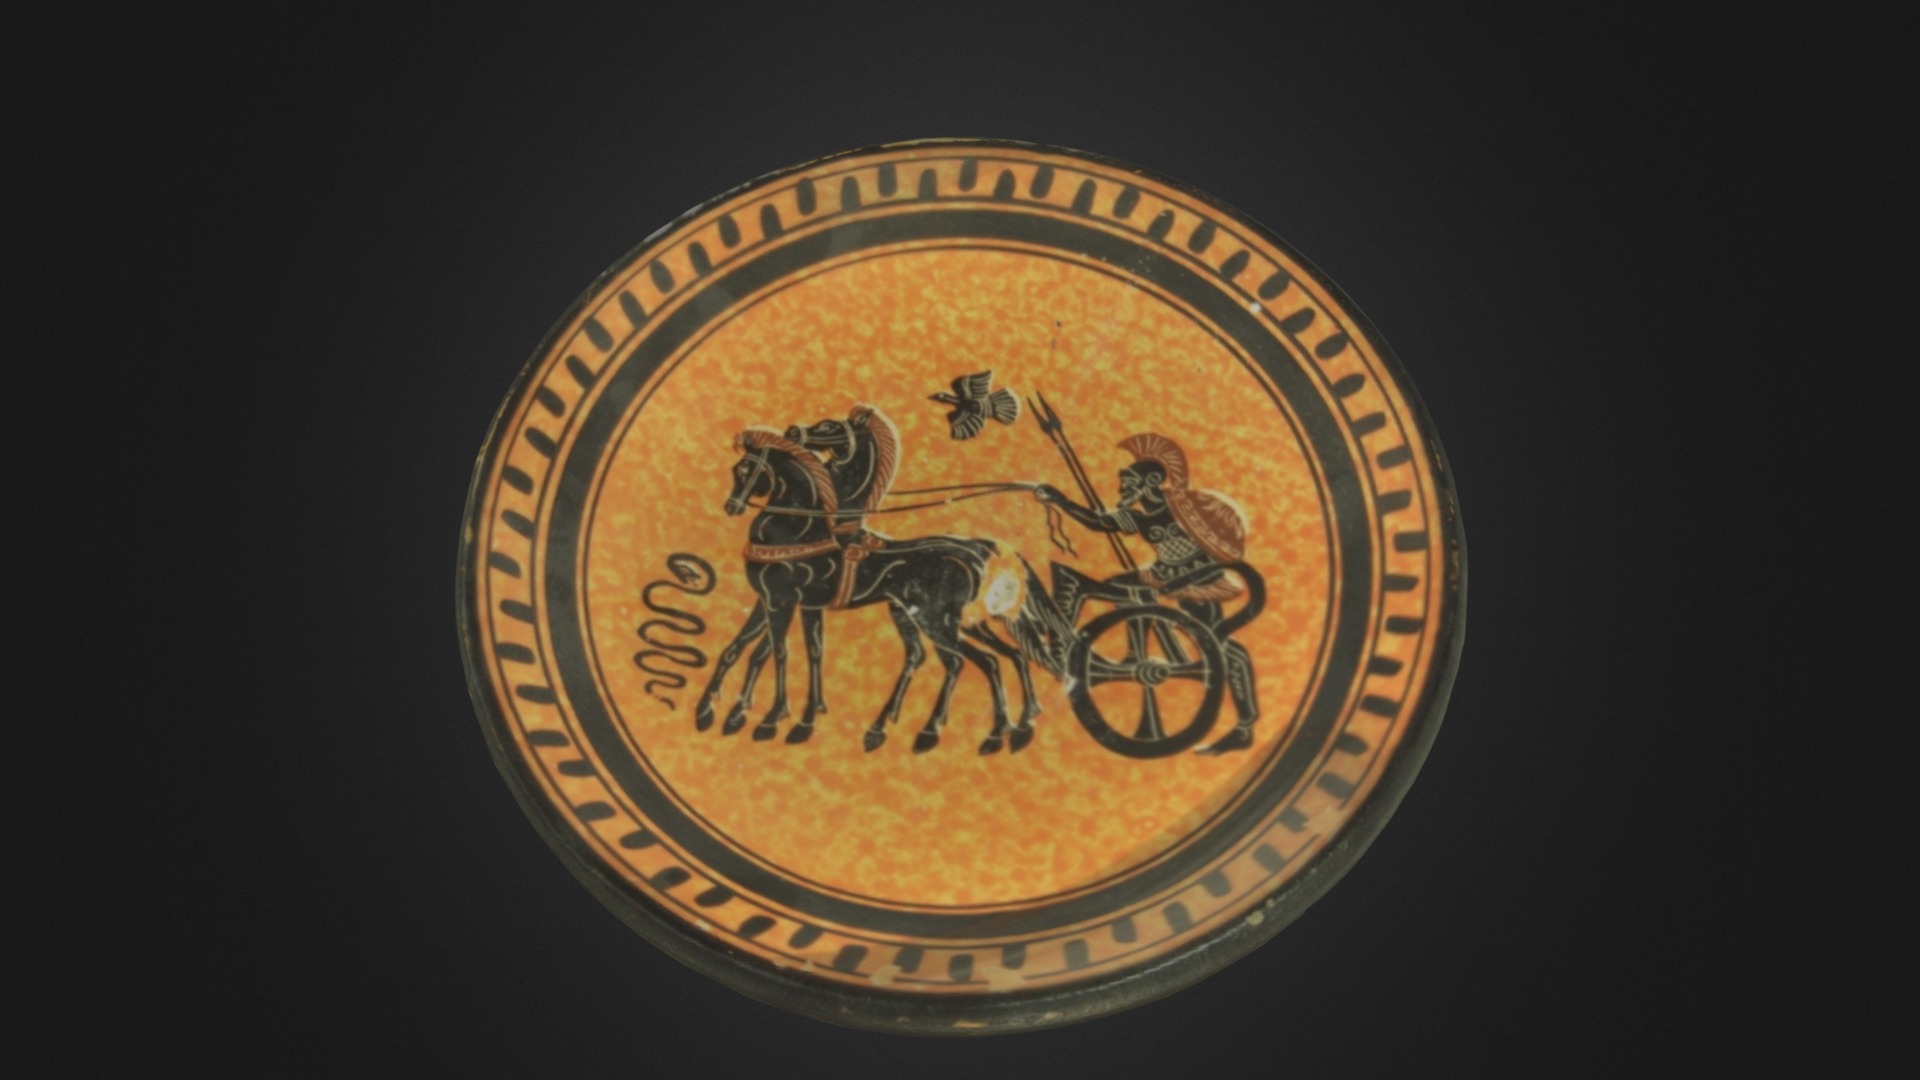 3D model Teller Streitwagen – Quad - This is a 3D model of the Teller Streitwagen - Quad. The 3D model is about a coin with a group of people riding horses.